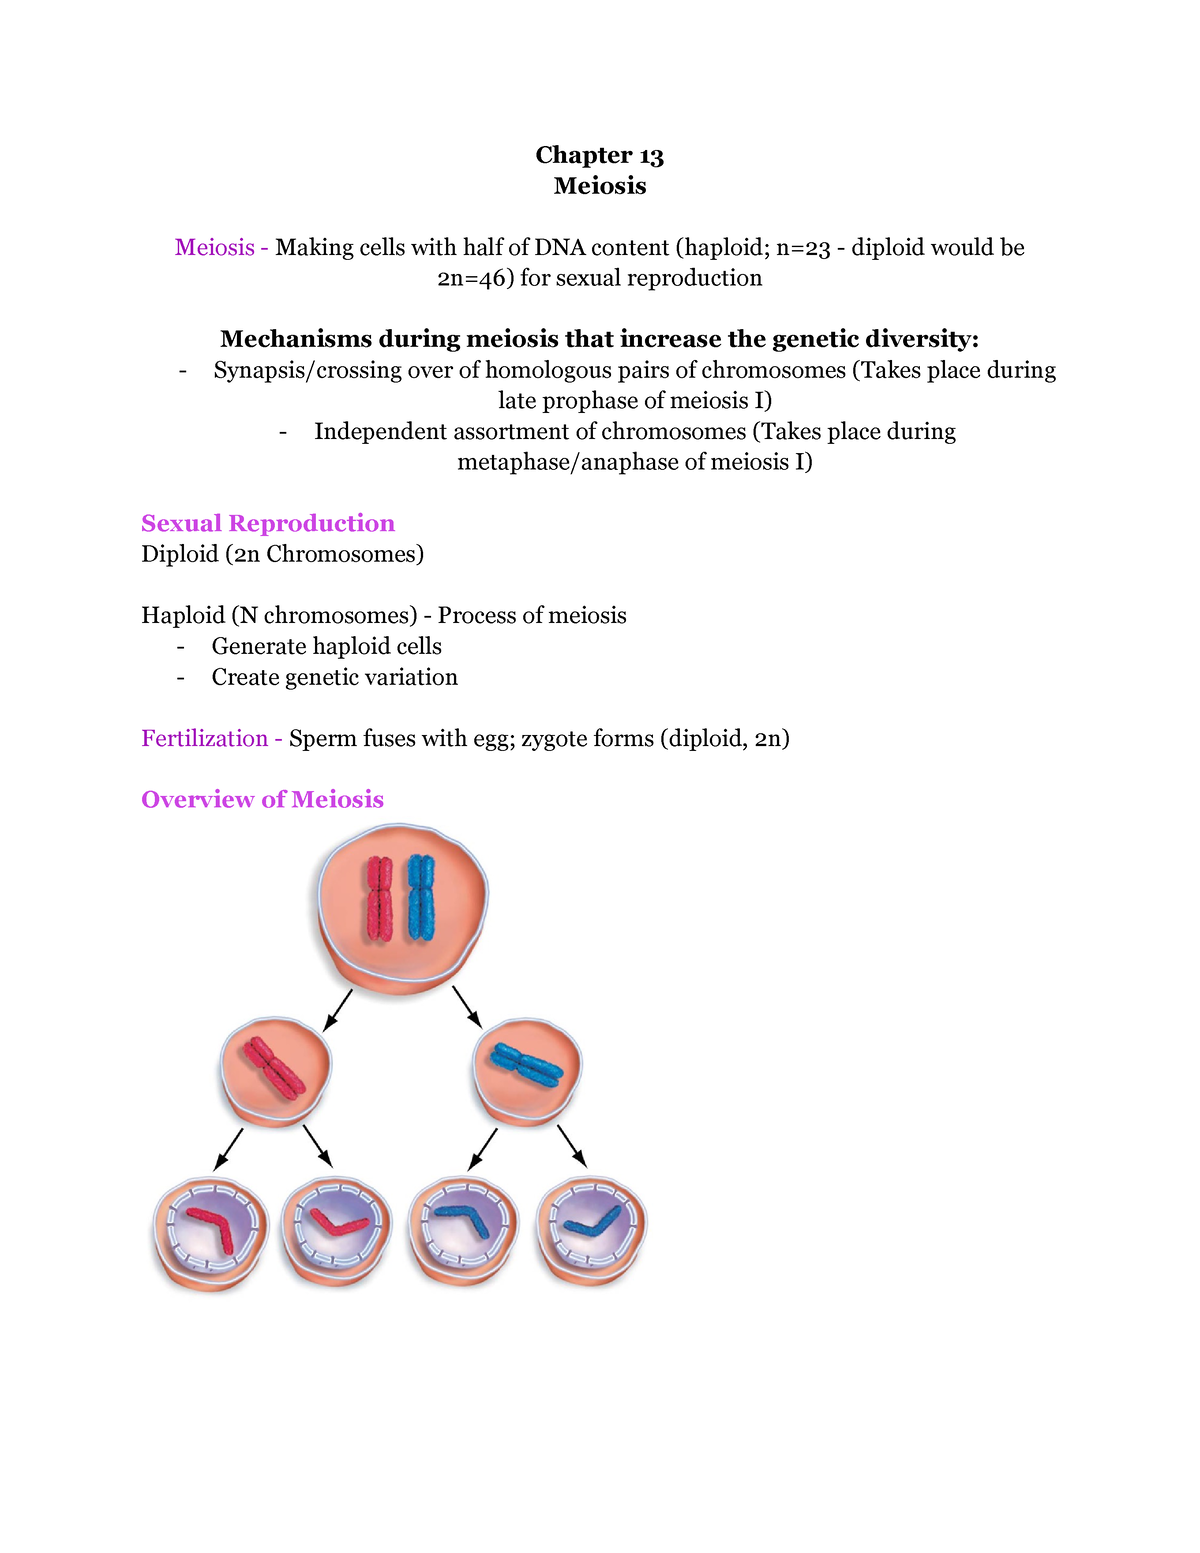 Chapter 13 Outline - Chapter 13 Meiosis Meiosis - Making cells